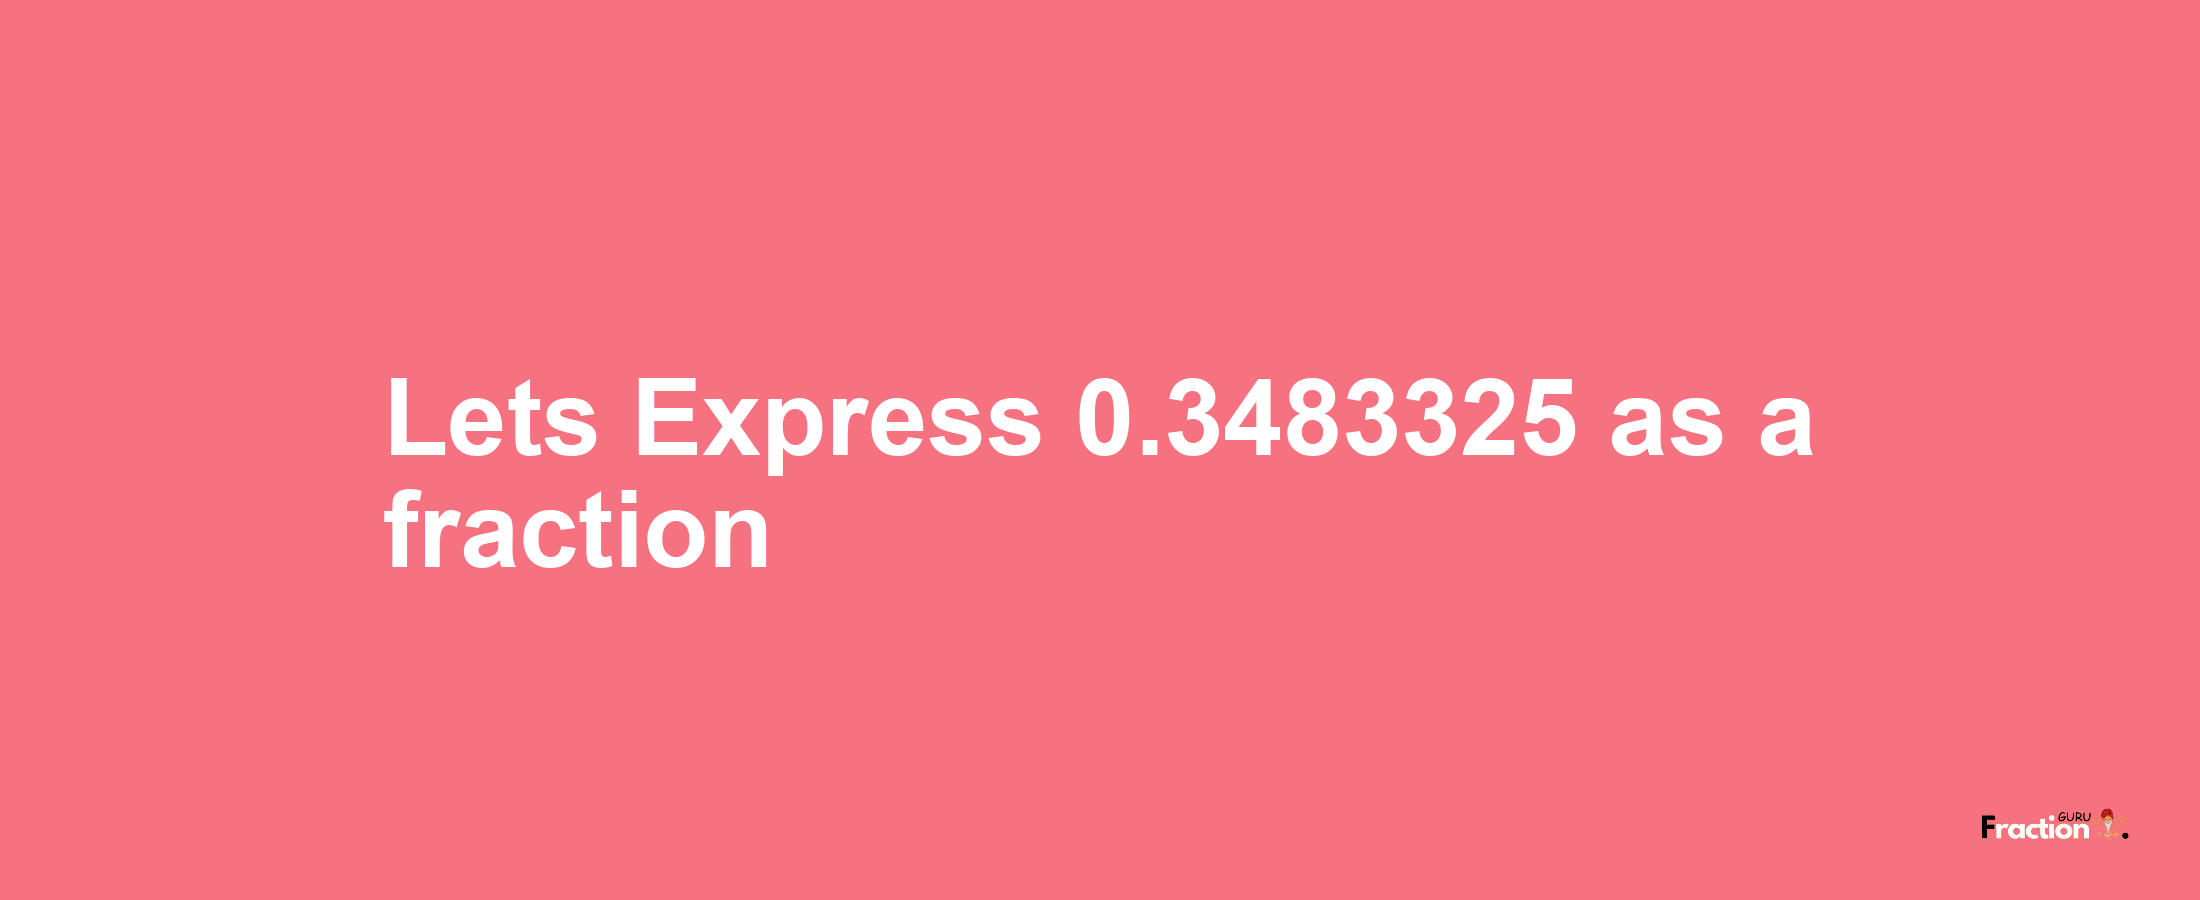 Lets Express 0.3483325 as afraction